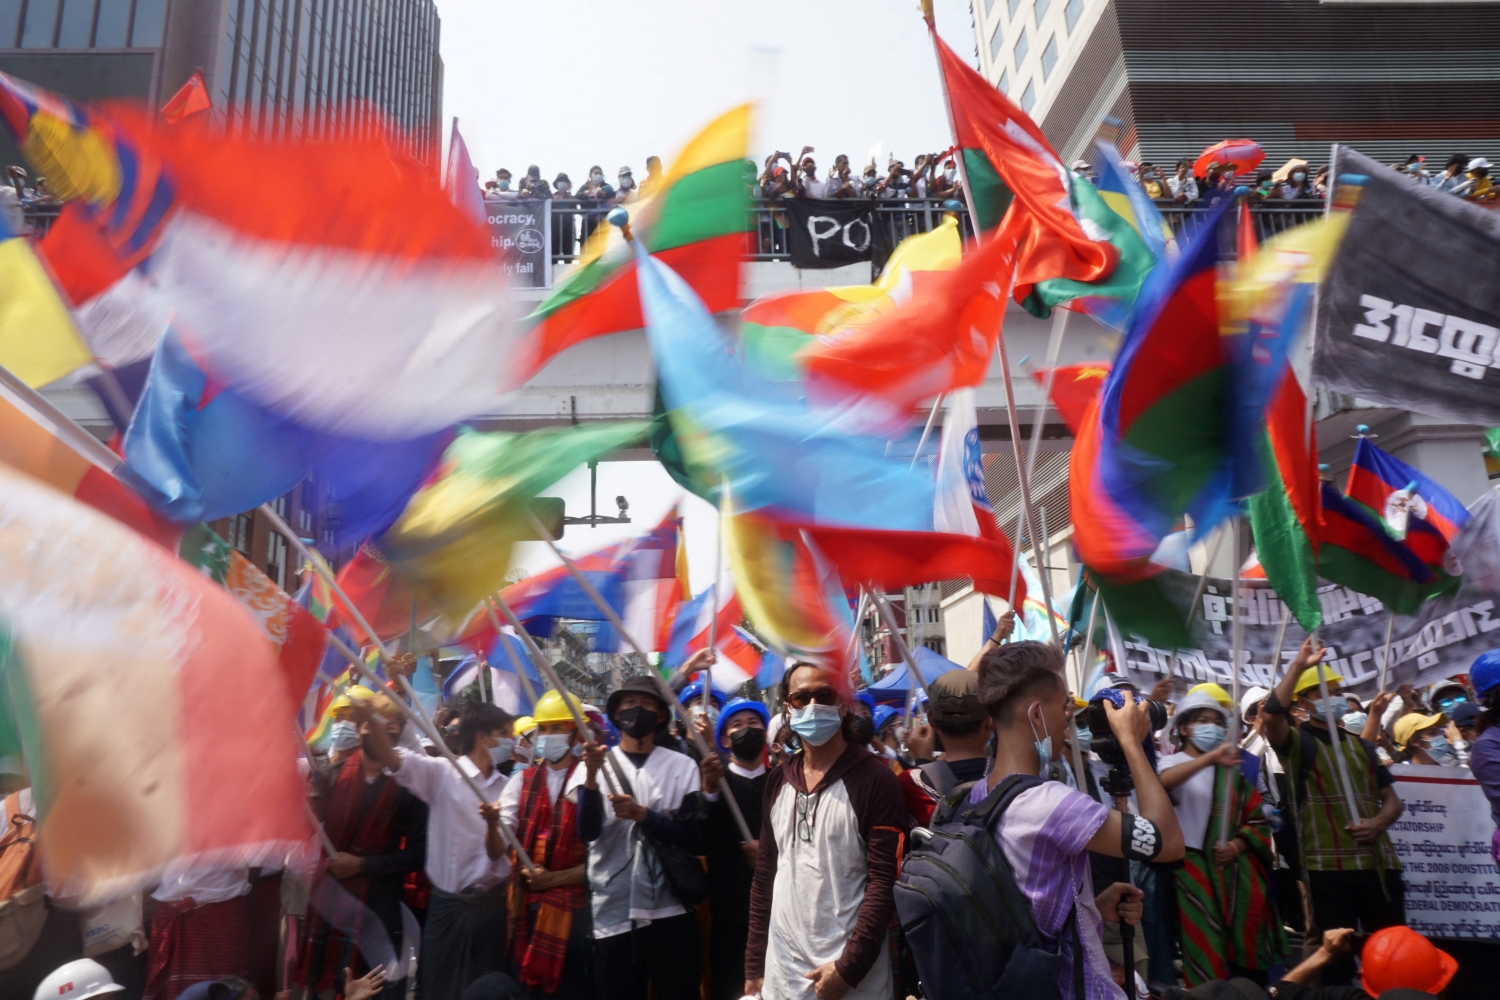 Protesters wave the flags of different ethnic nationalities while marching through Yangon on February 18 to oppose military rule. (AFP)